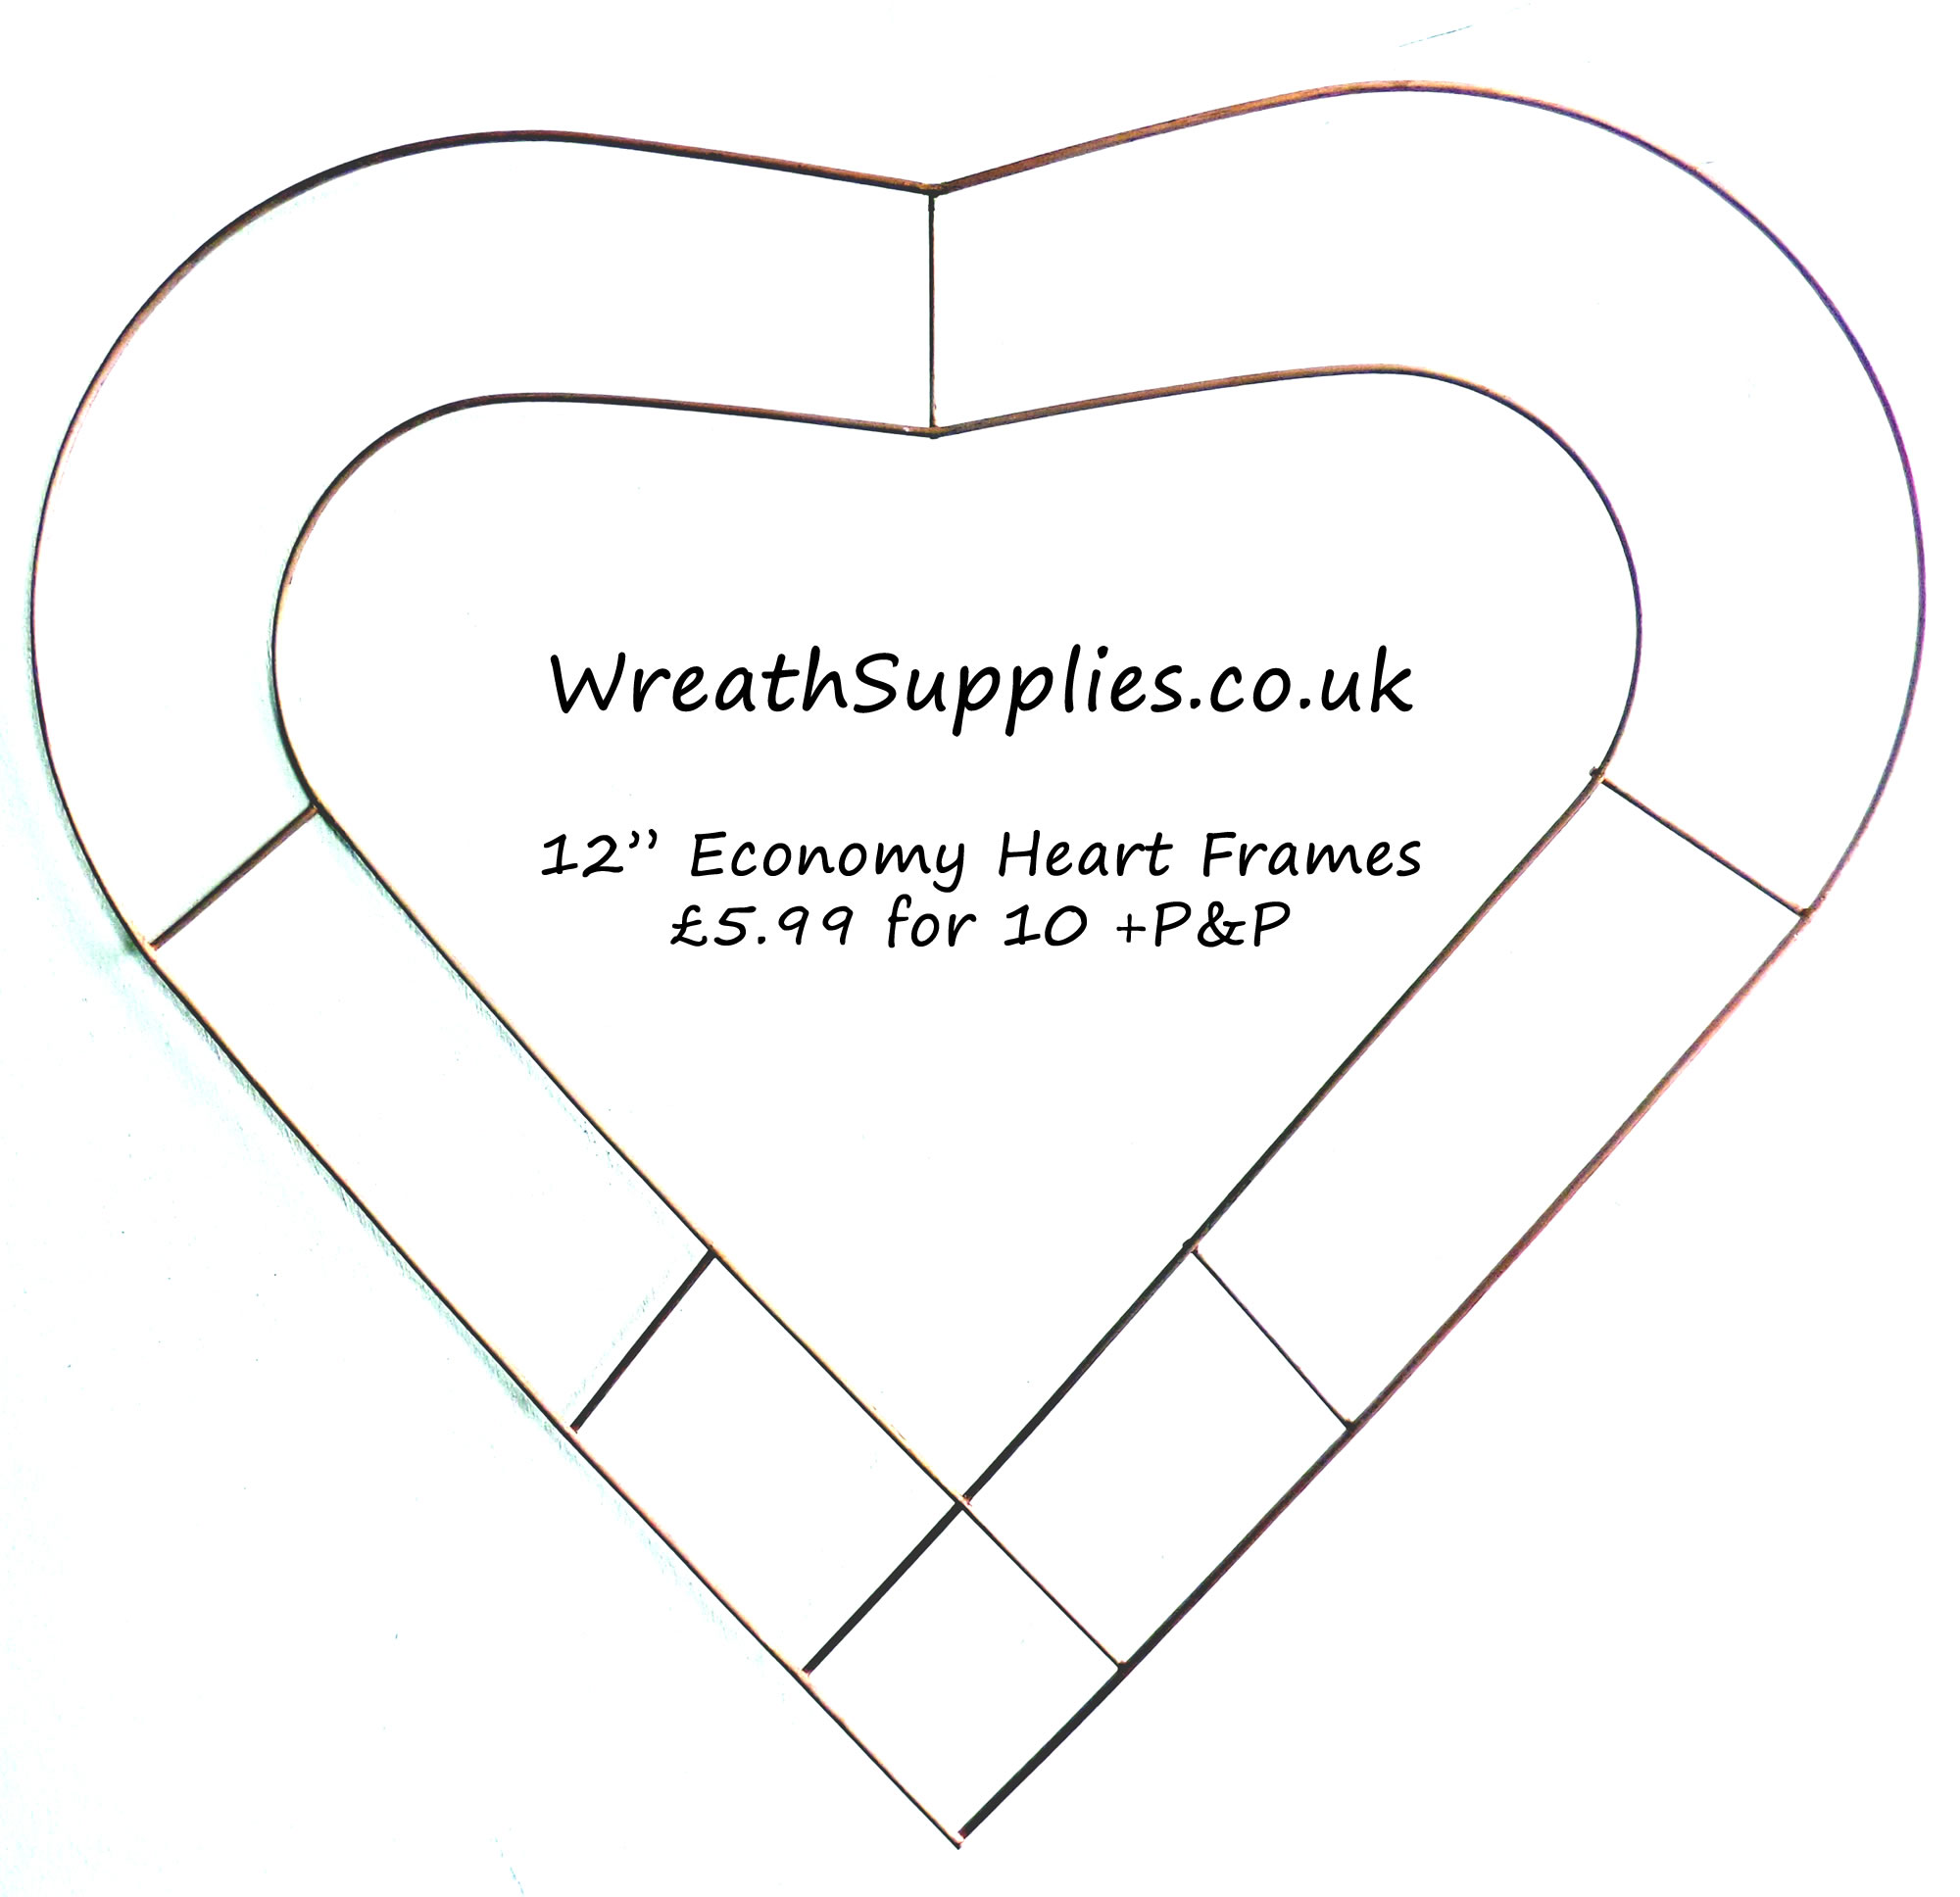 New wire heart frame for wreaths and crafts arrived